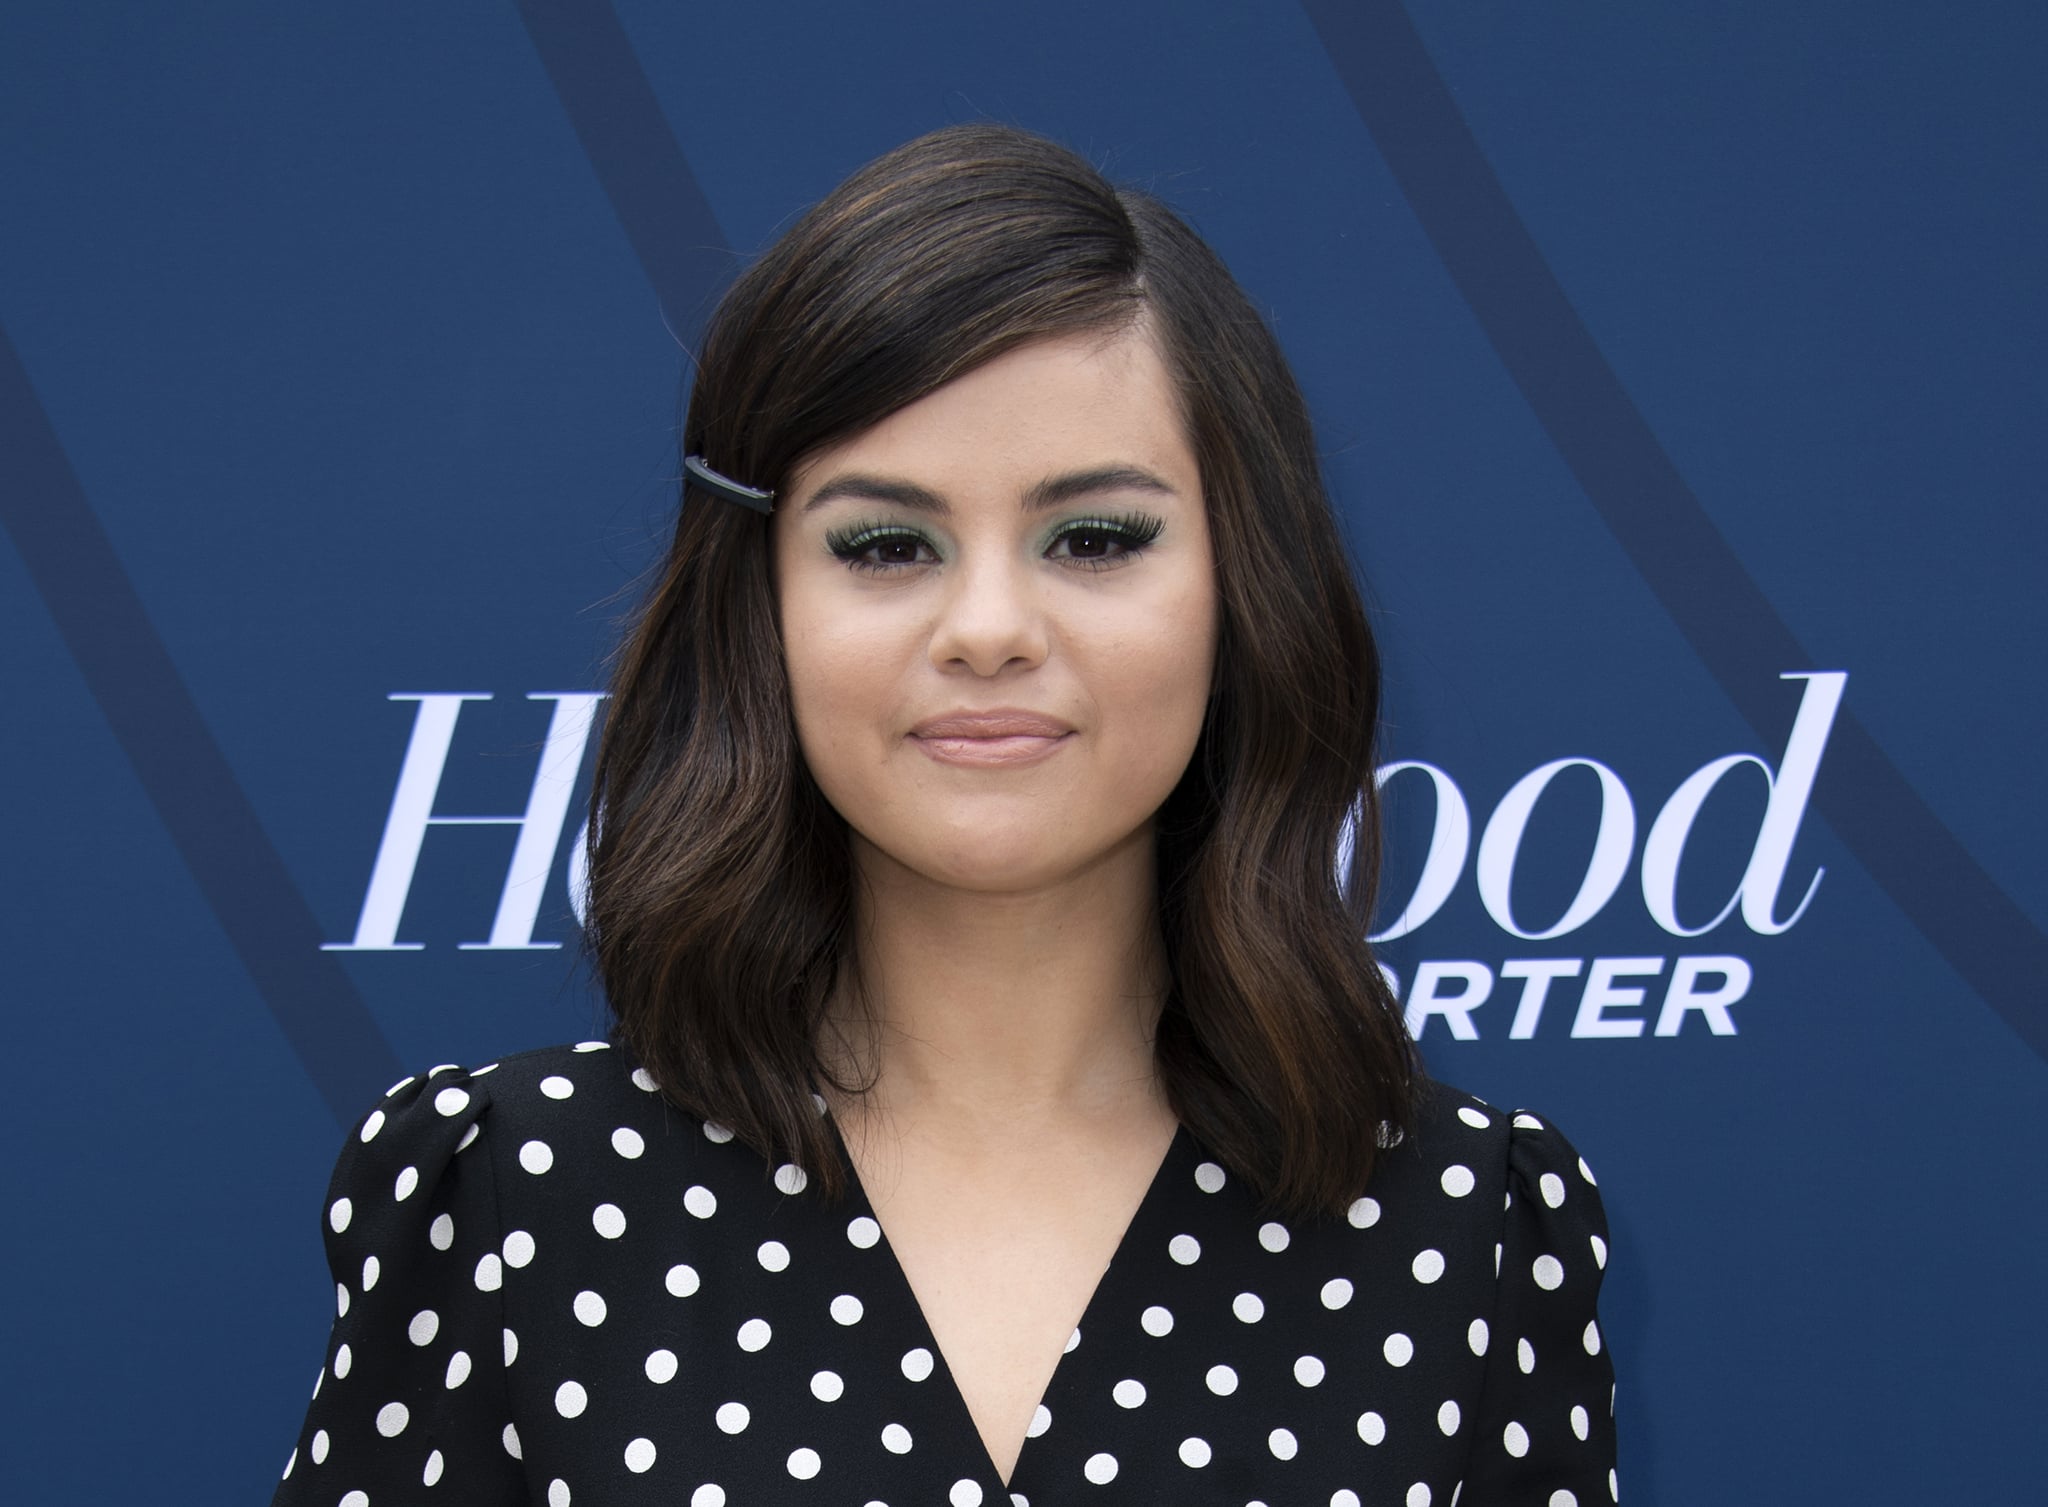 Selena Gomez Has A Bob Haircut That Might Be Her Shortest Style Yet